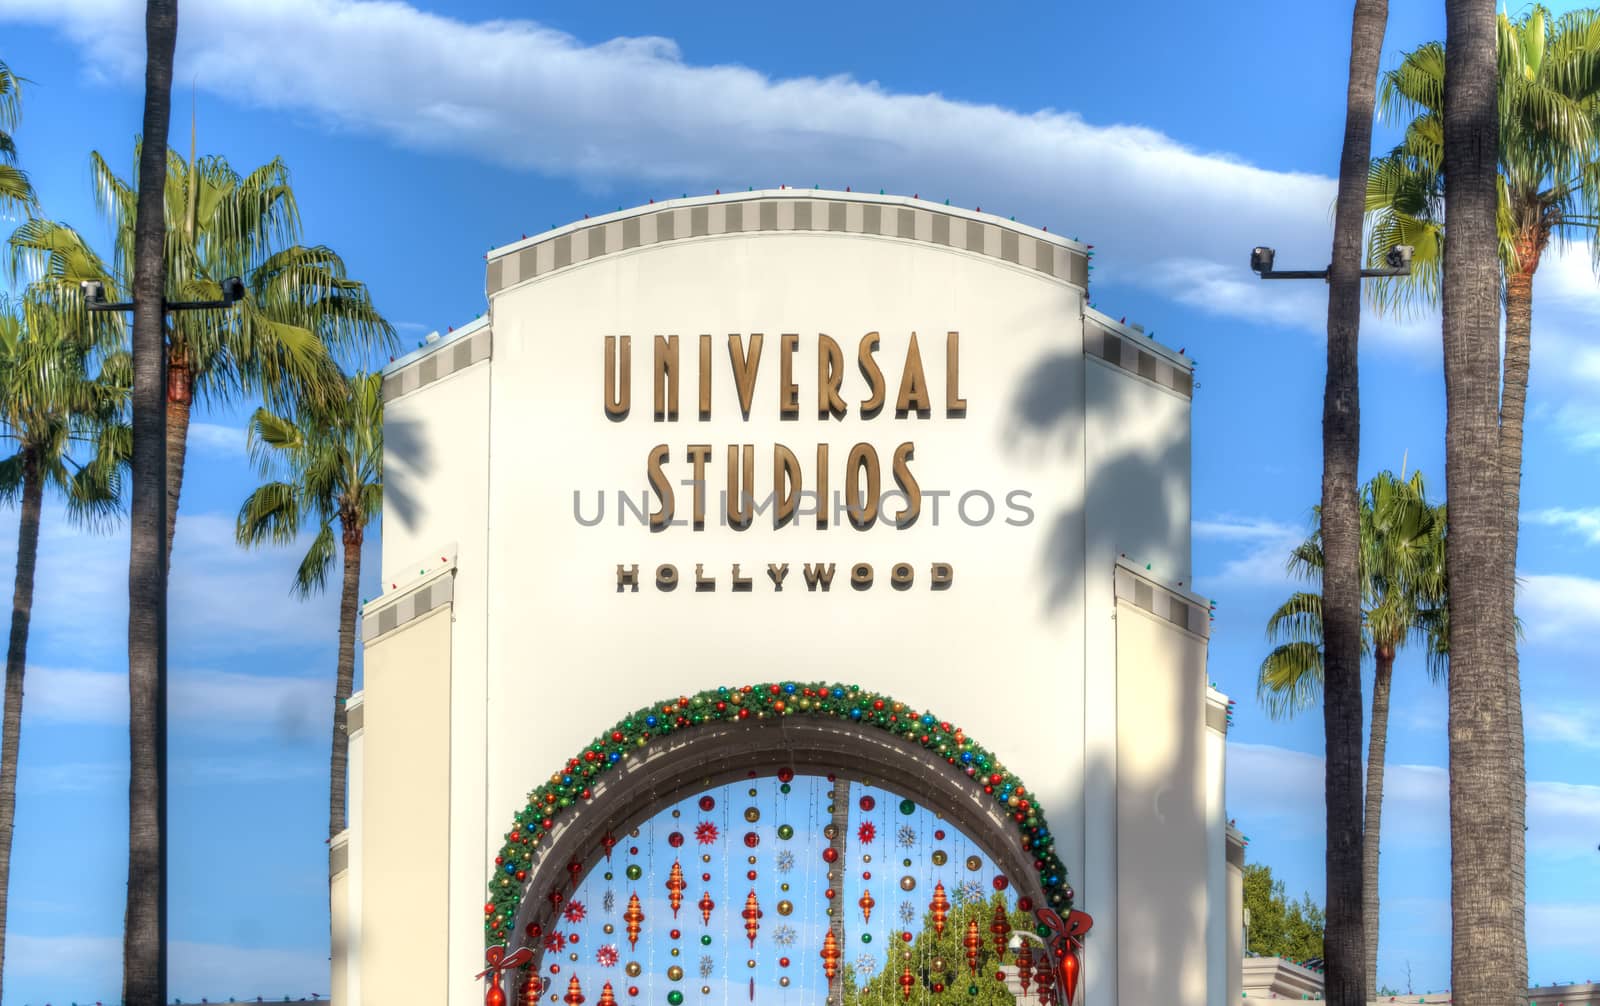 UNIVERSAL CITY, CA/USA DECEMBER 22, 2015: Universal Studios of Hollywood entrance. Universal Studios Hollywood is a film studio and theme park